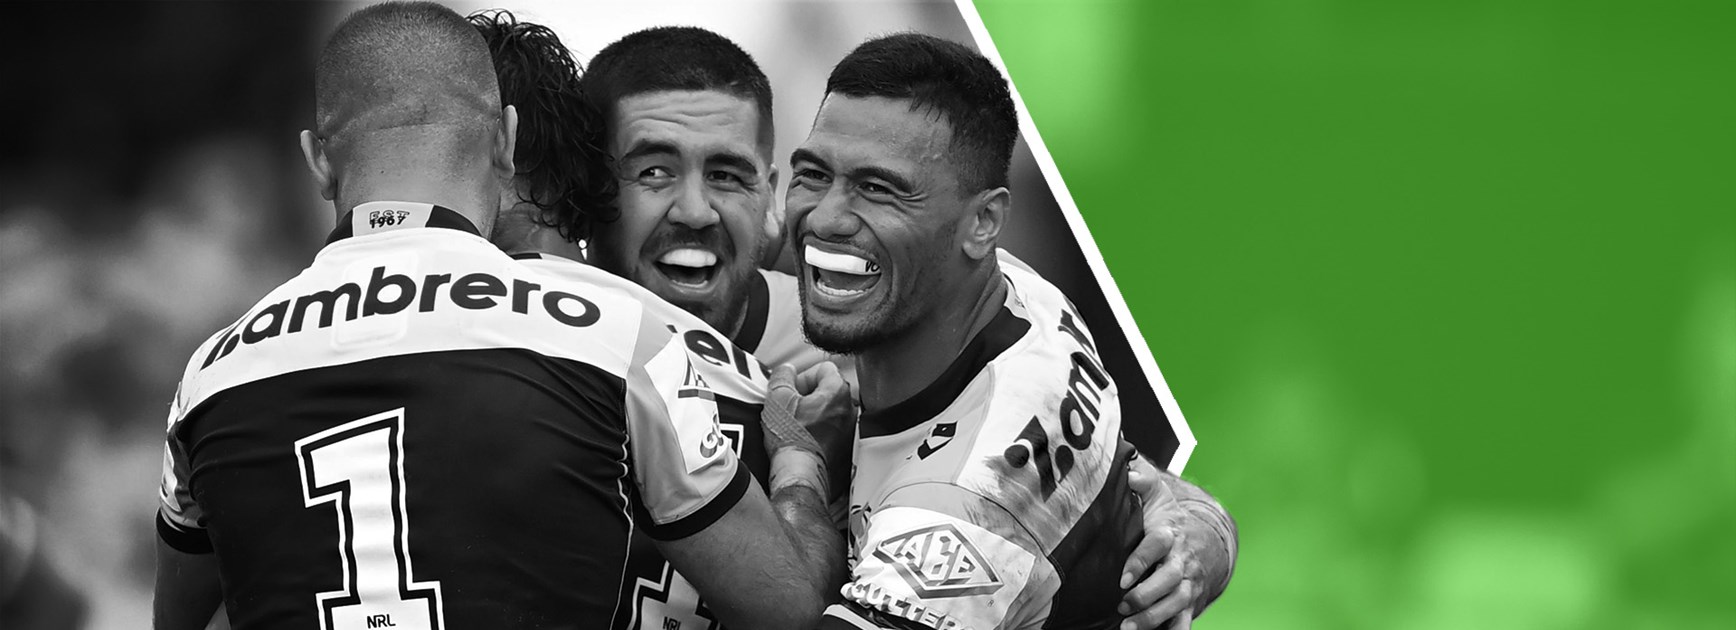 NRL Tipping: Expert tips for Round 19